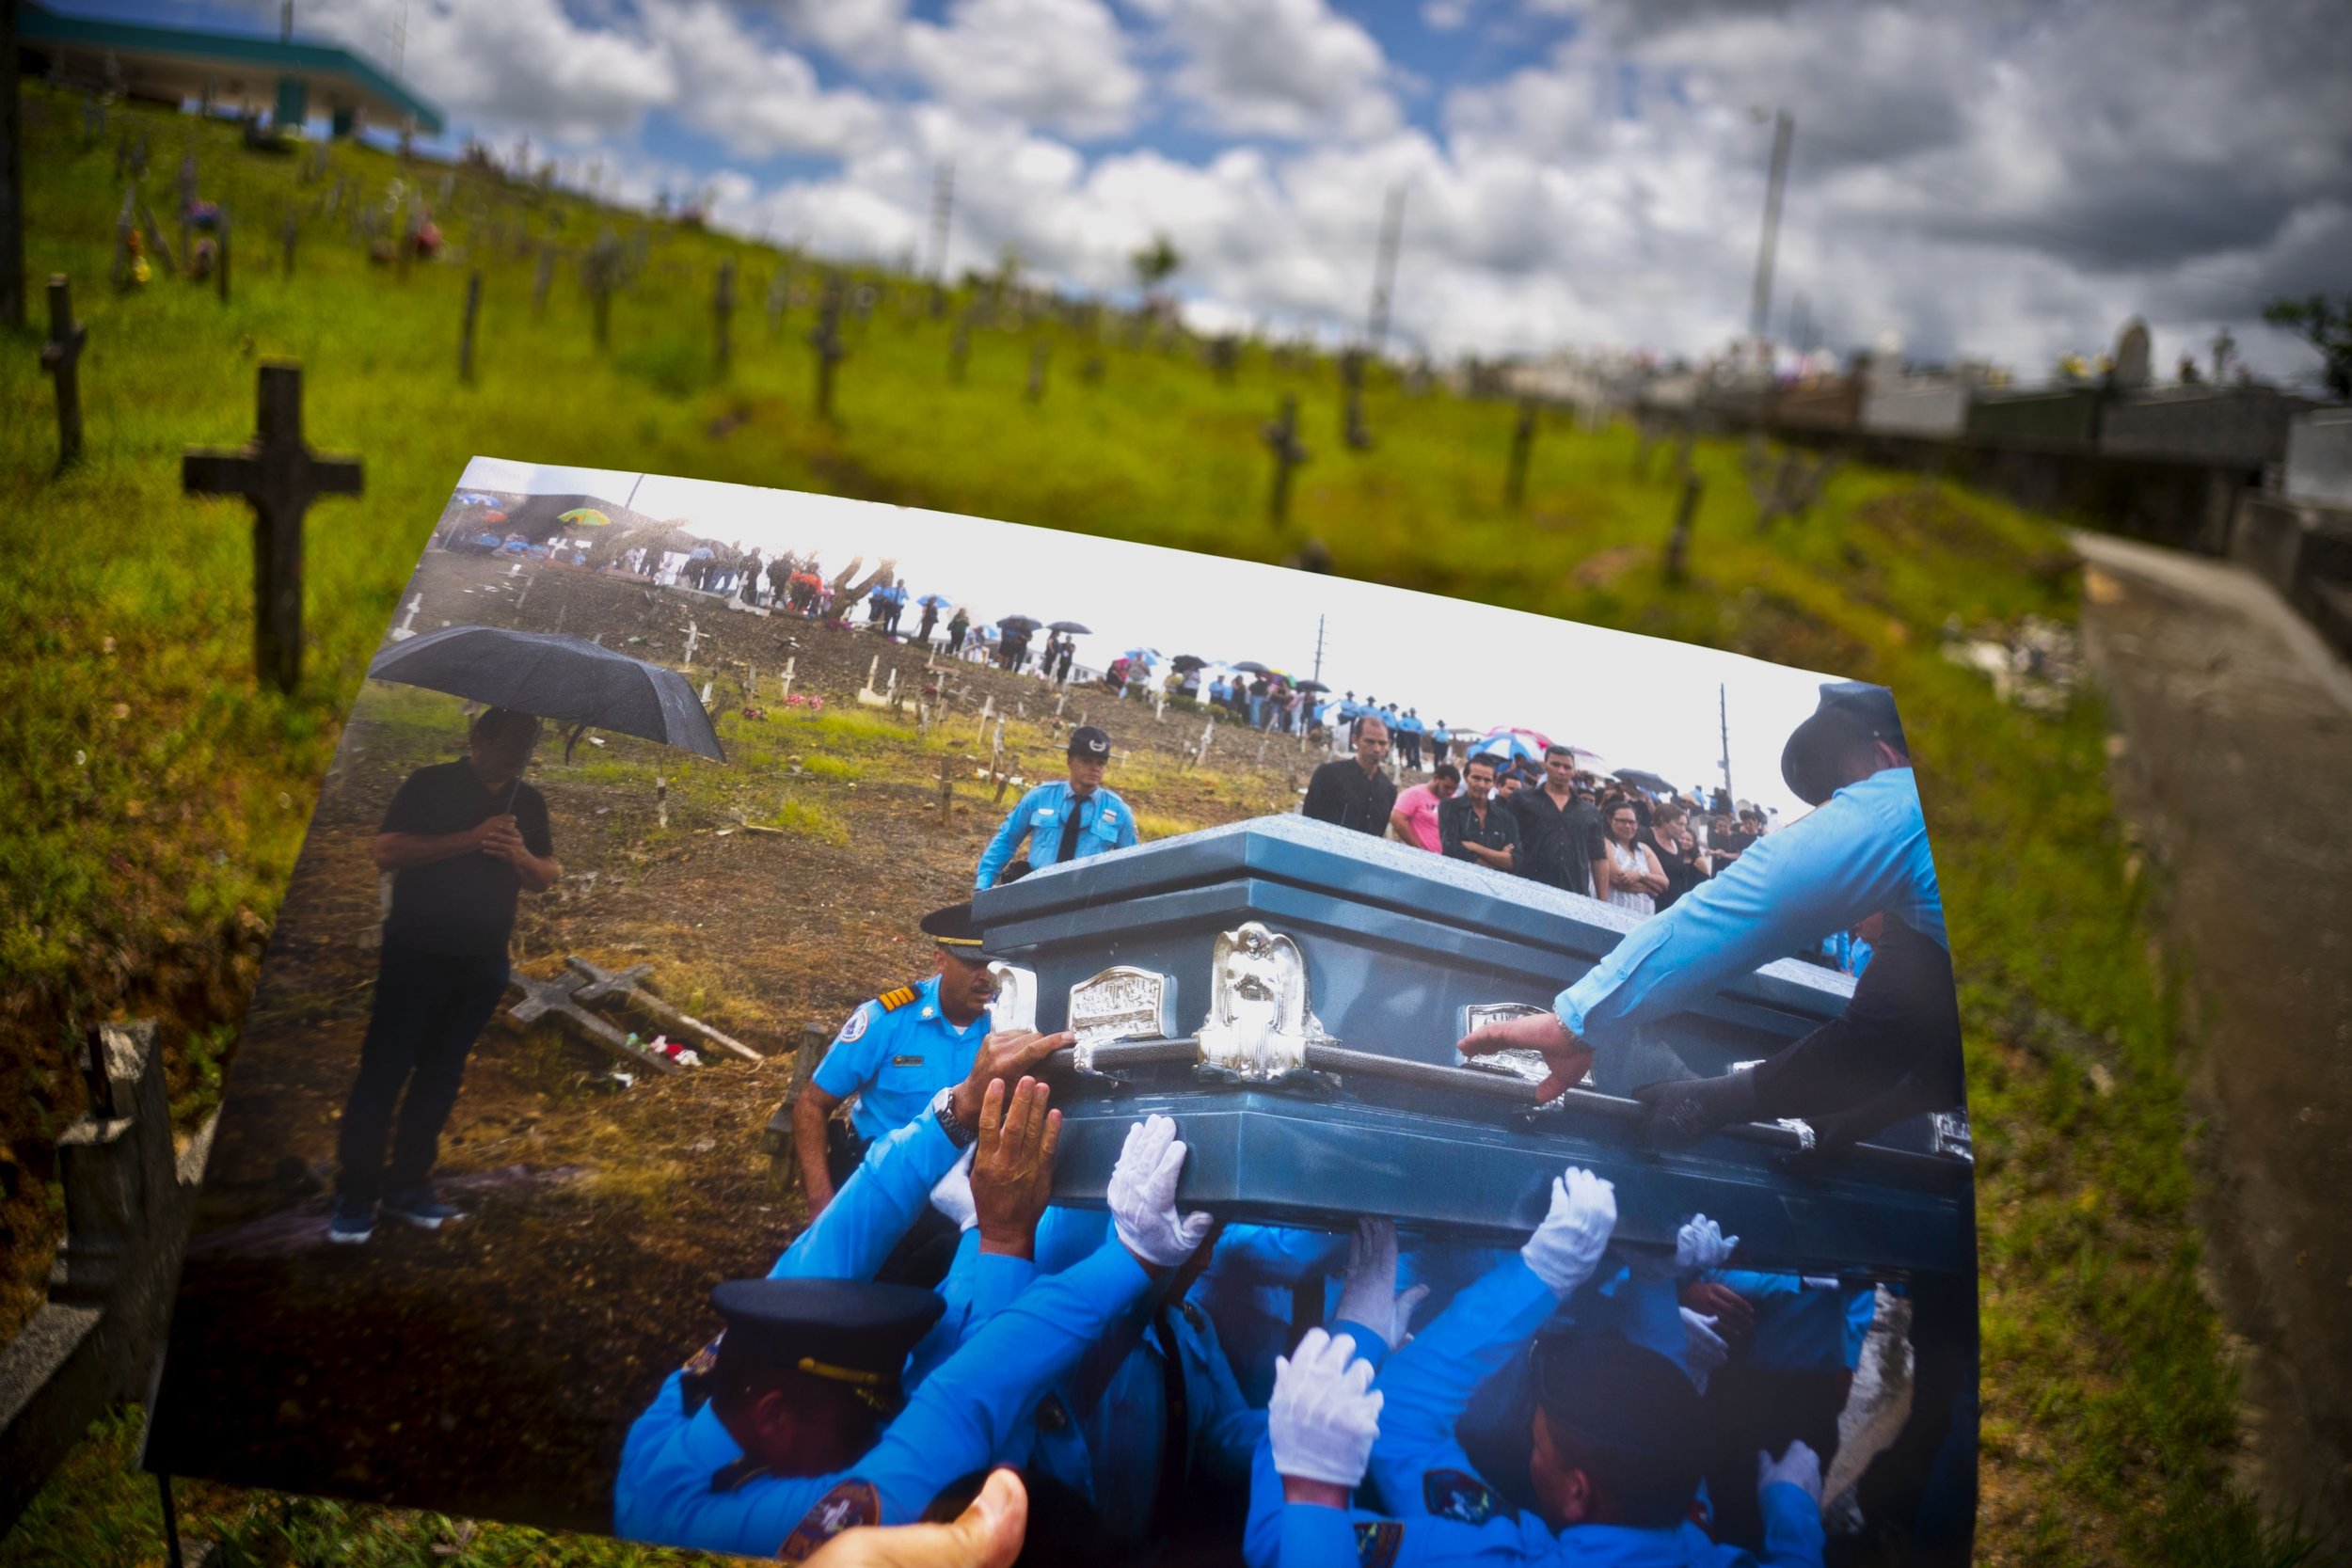  A printed photo taken on Sept. 29, 2017 showing police lifting the coffin of officer Luis Angel Gonzalez Lorenzo, who was killed during the passage of Hurricane Maria when he tried to cross a river in his car, is shown at the same cemetery in Aguada